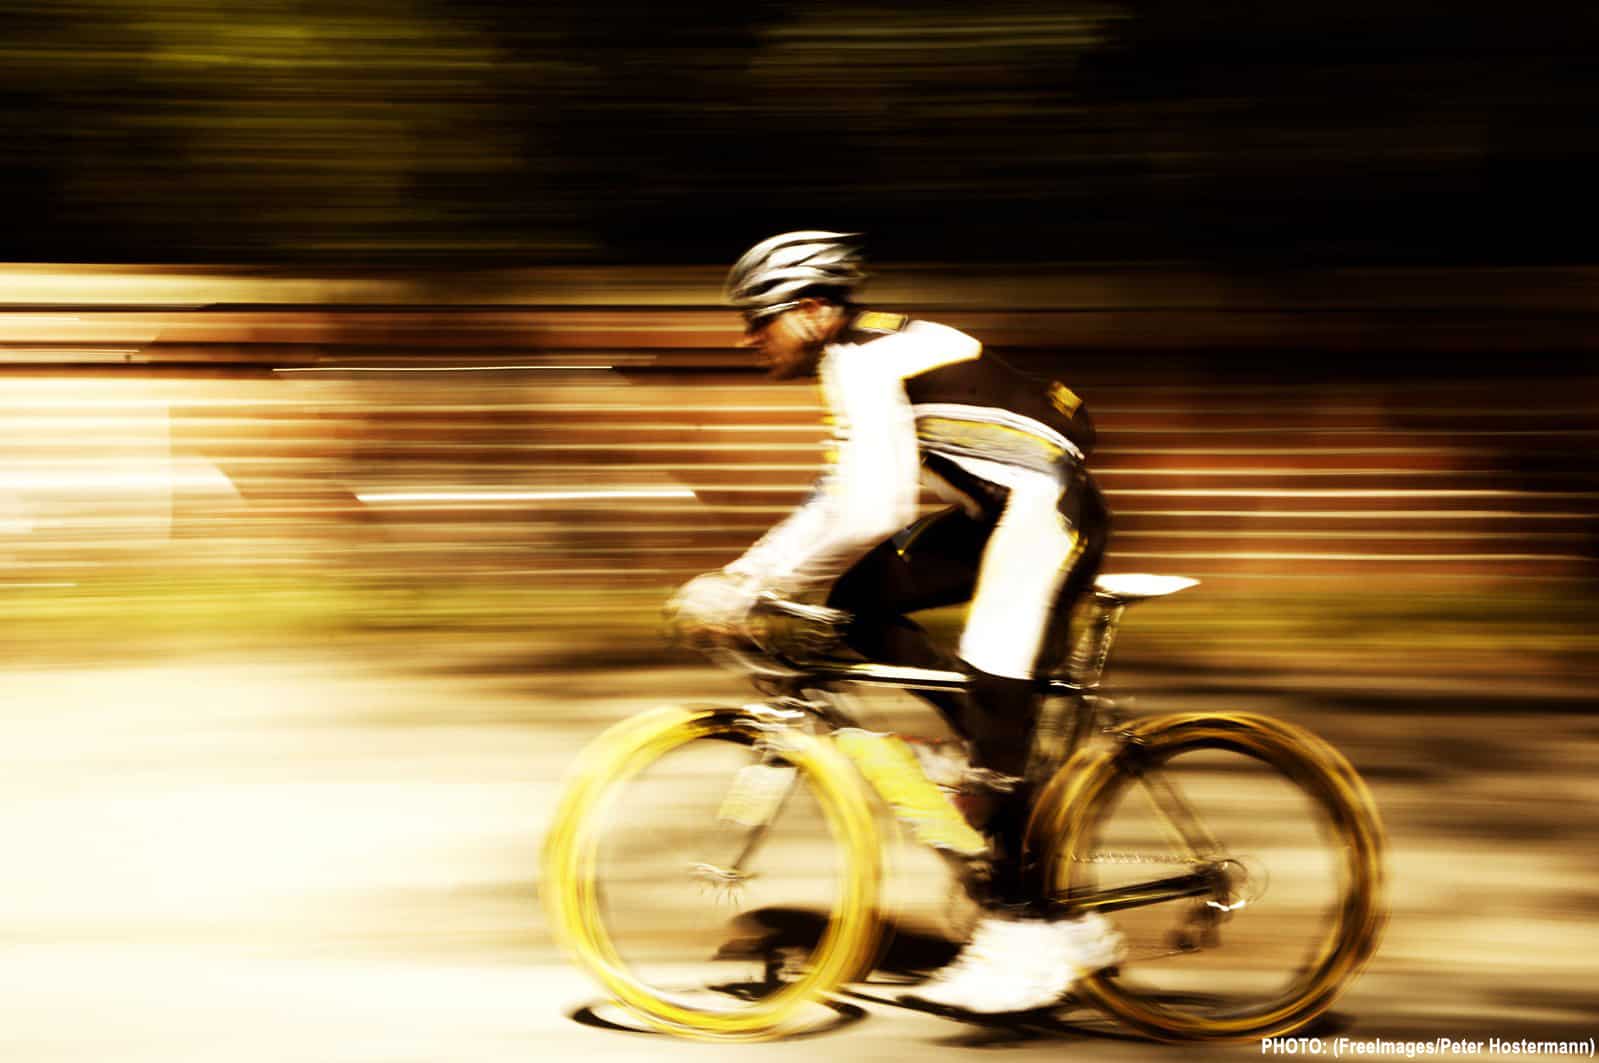 cyclist riding a bike with a blurred background